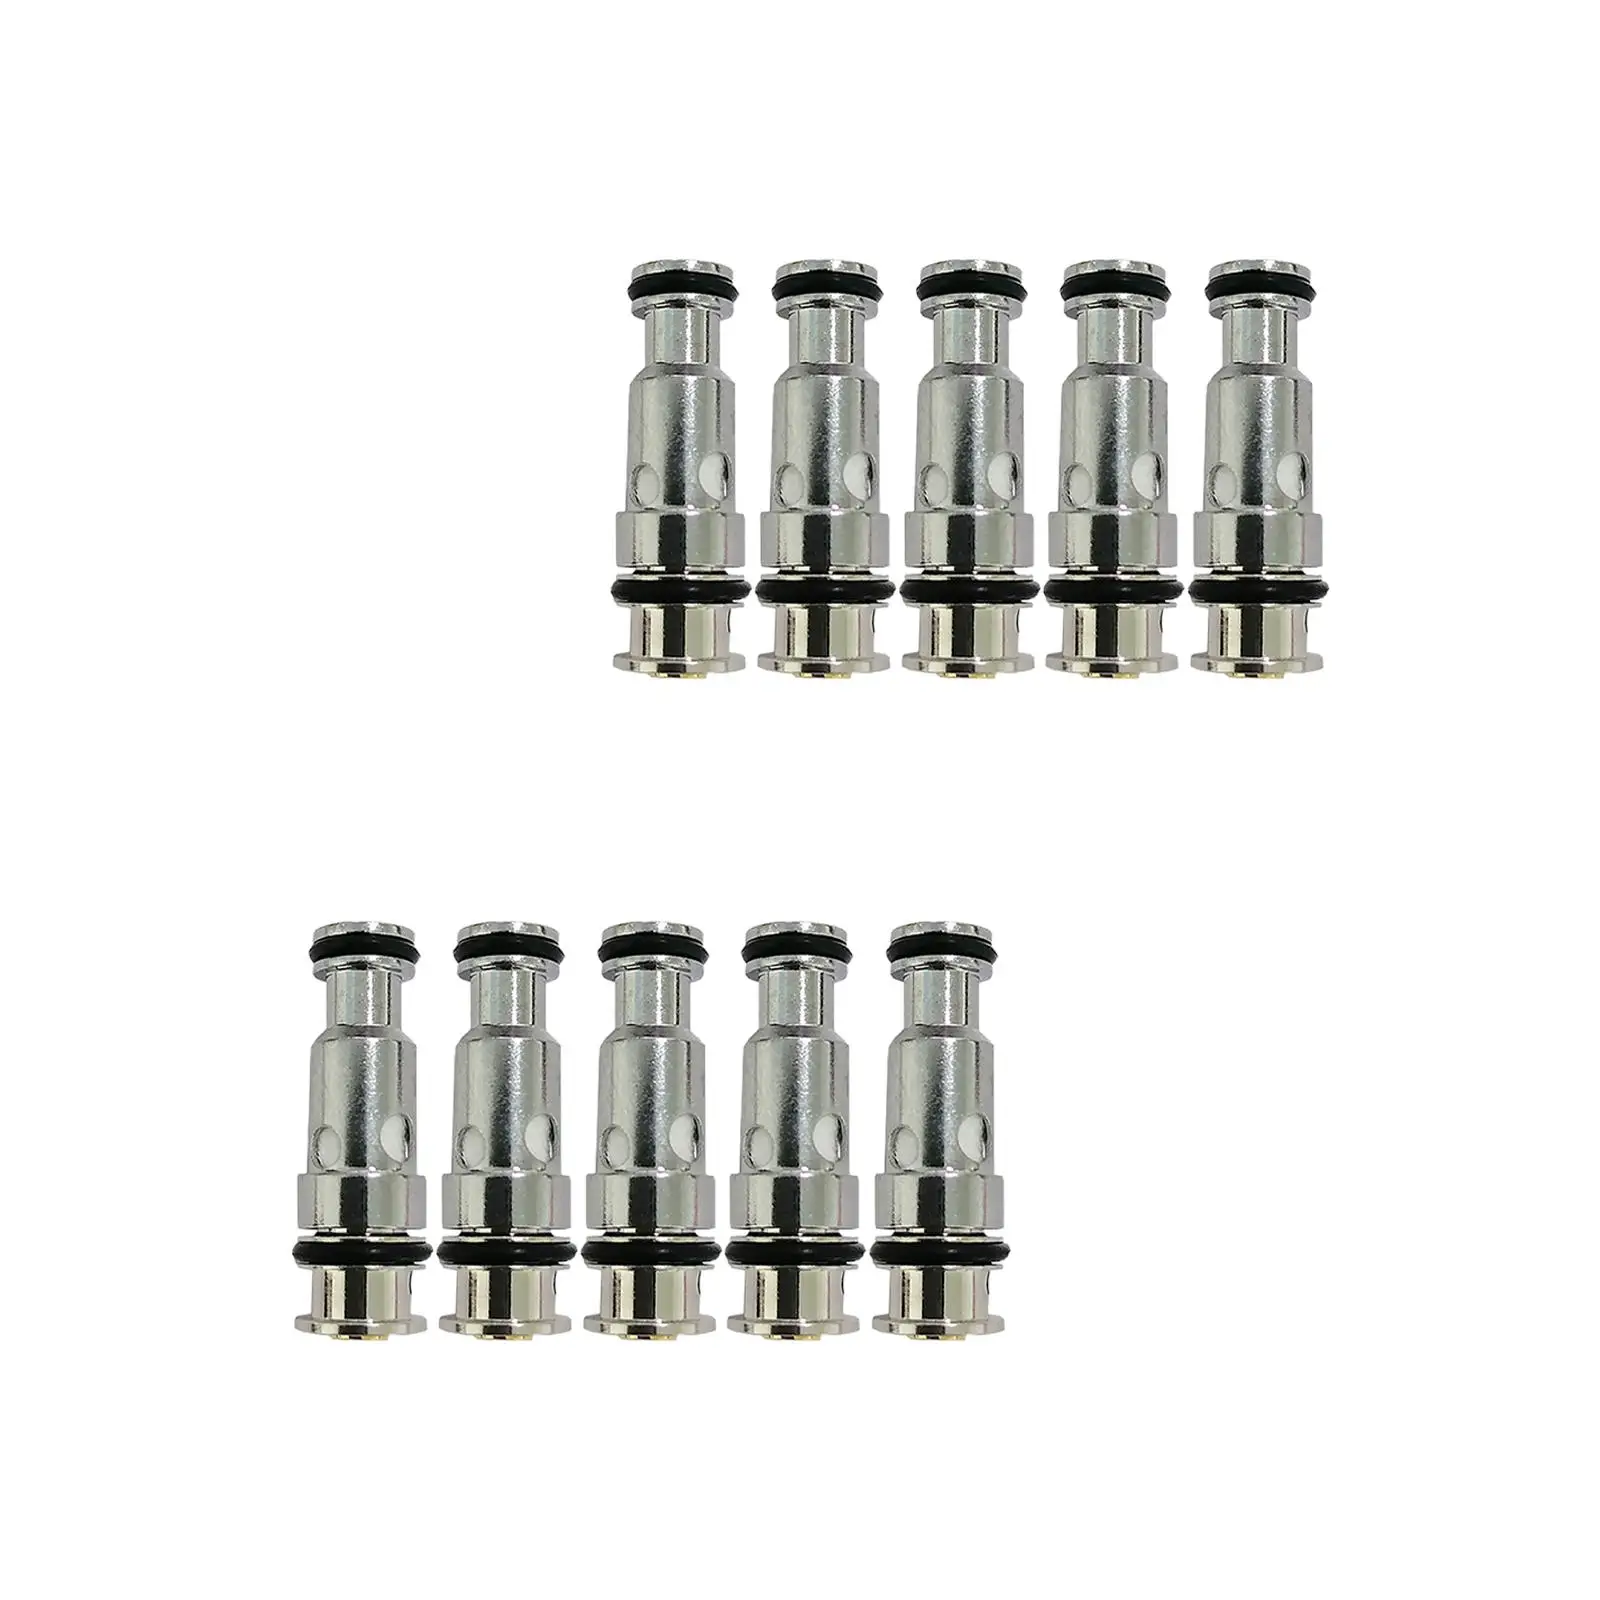 Set of 5 PNP Coils Head Plug in Play Stainless Steel Easy Use Durable for Argus Air 857 Accs Parts